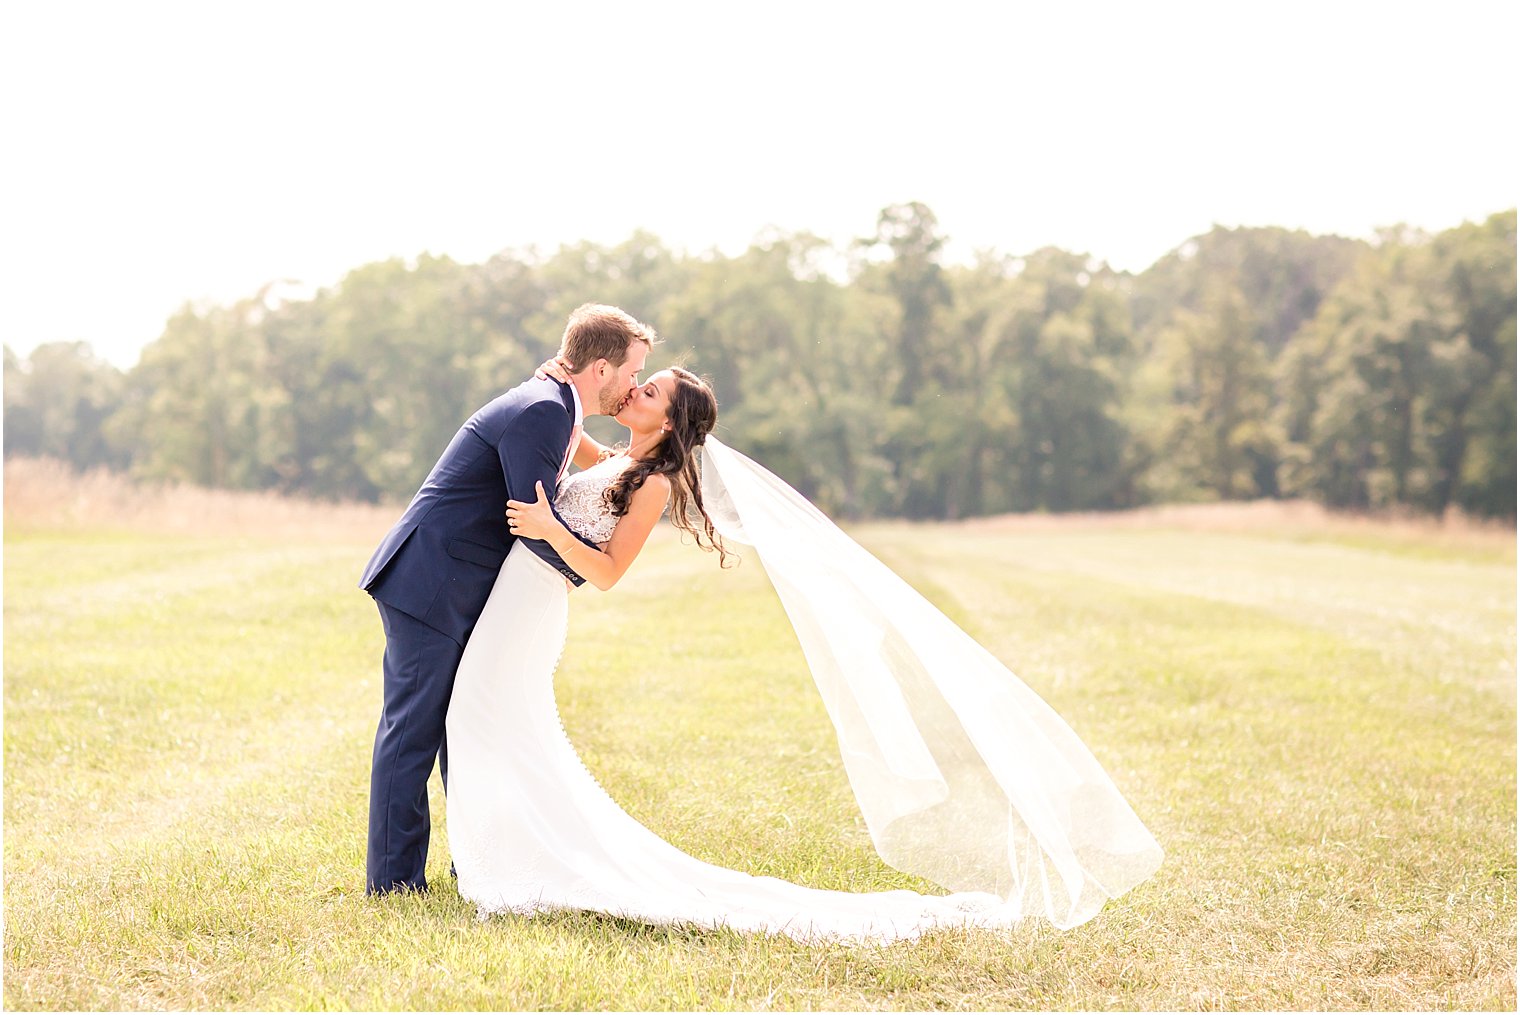 Wedding portrait of bride and groom in a large field | Photo by Idalia Photography